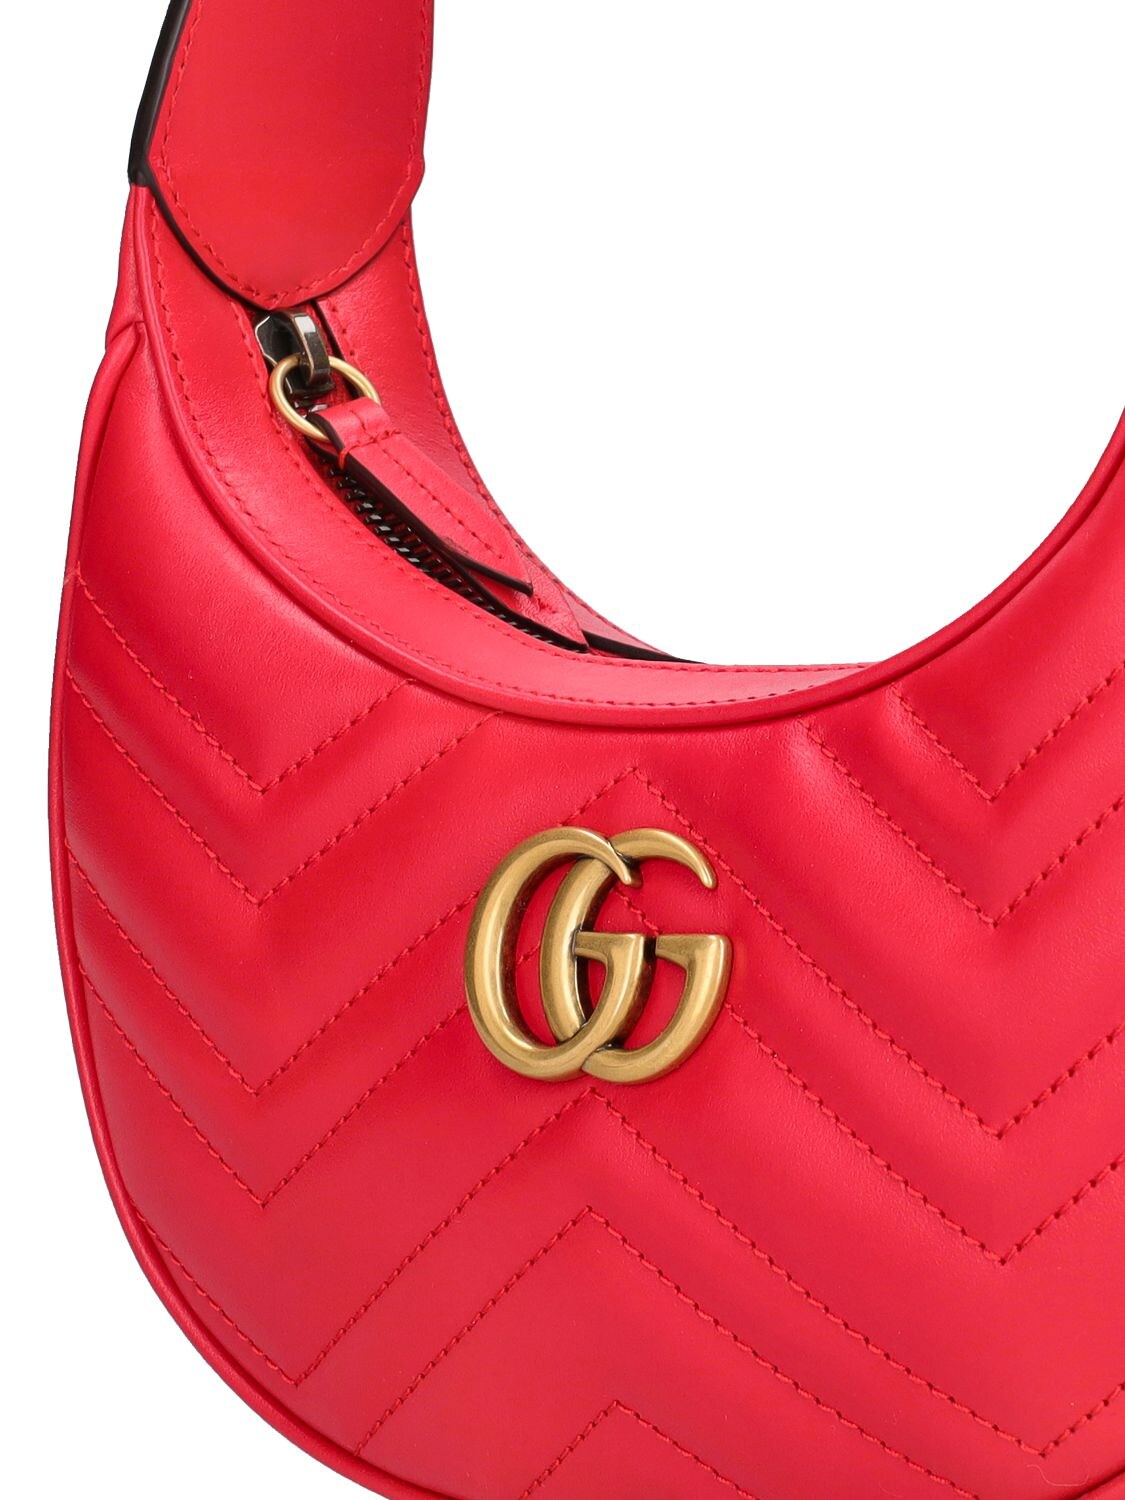 Red Quilted Leather 'GG' Half Moon Bag